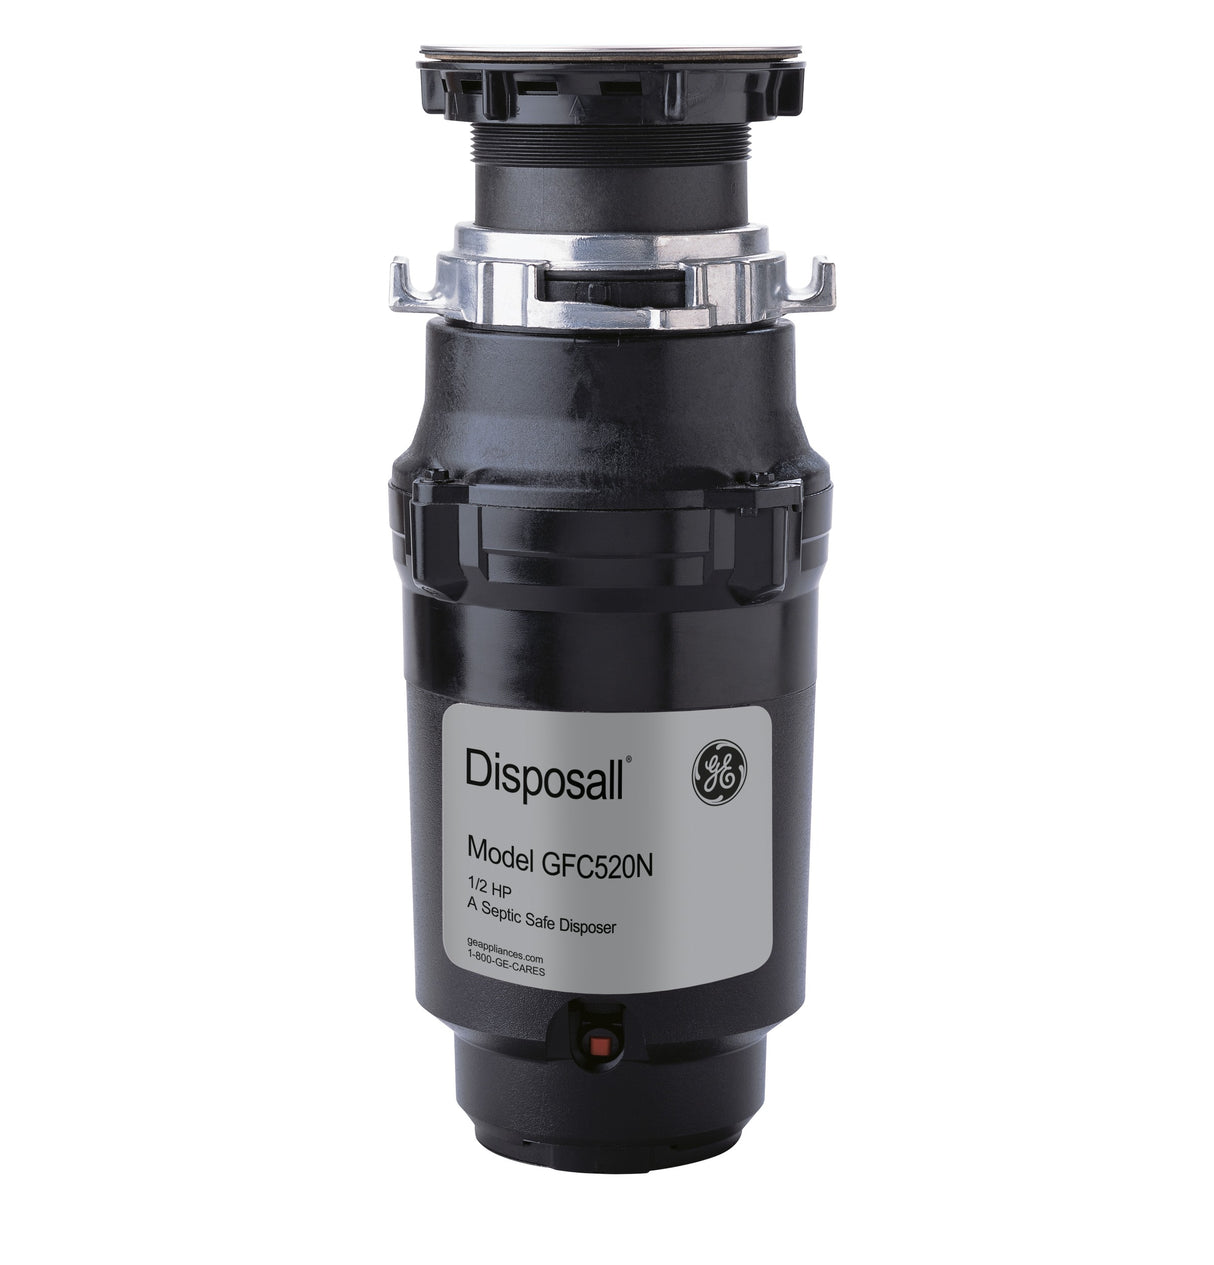 GE DISPOSALL(R) 1/2 HP Continuous Feed Garbage Disposer - Non-Corded - (GFC520N)